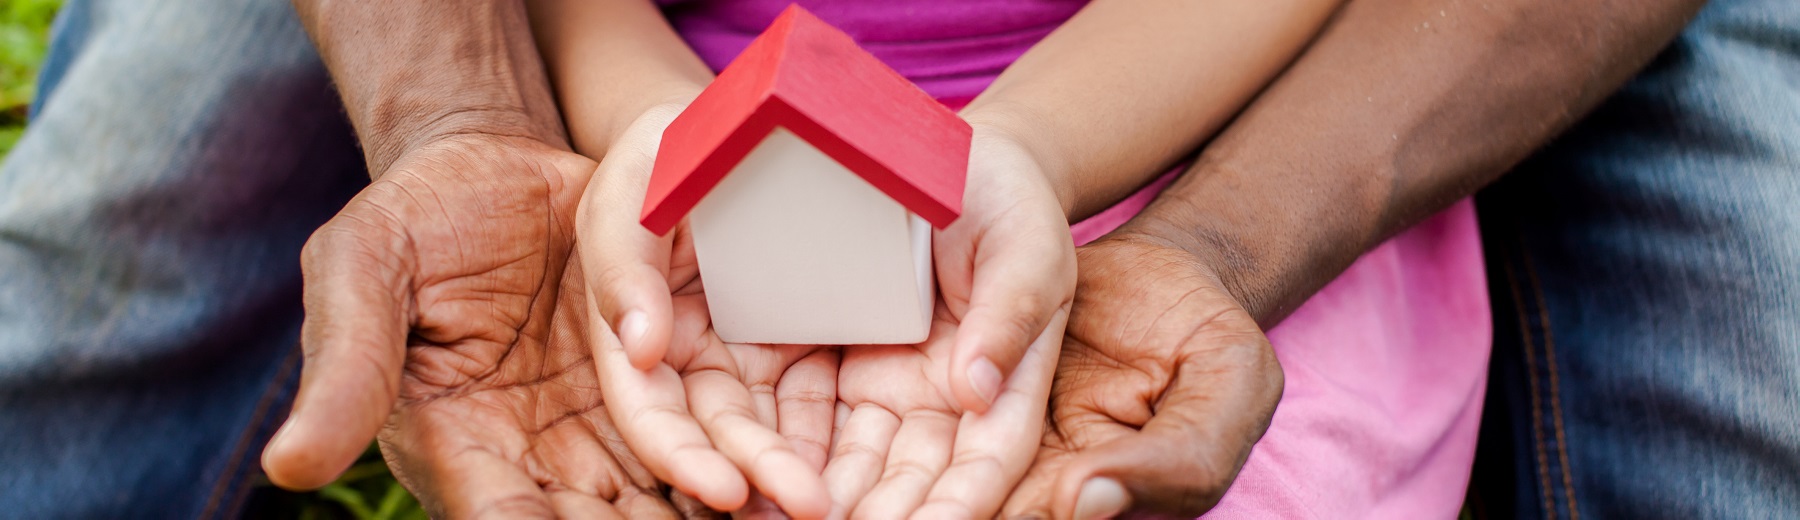 Image of a child holding a wooden house in their hands being supported by an adult's hands.